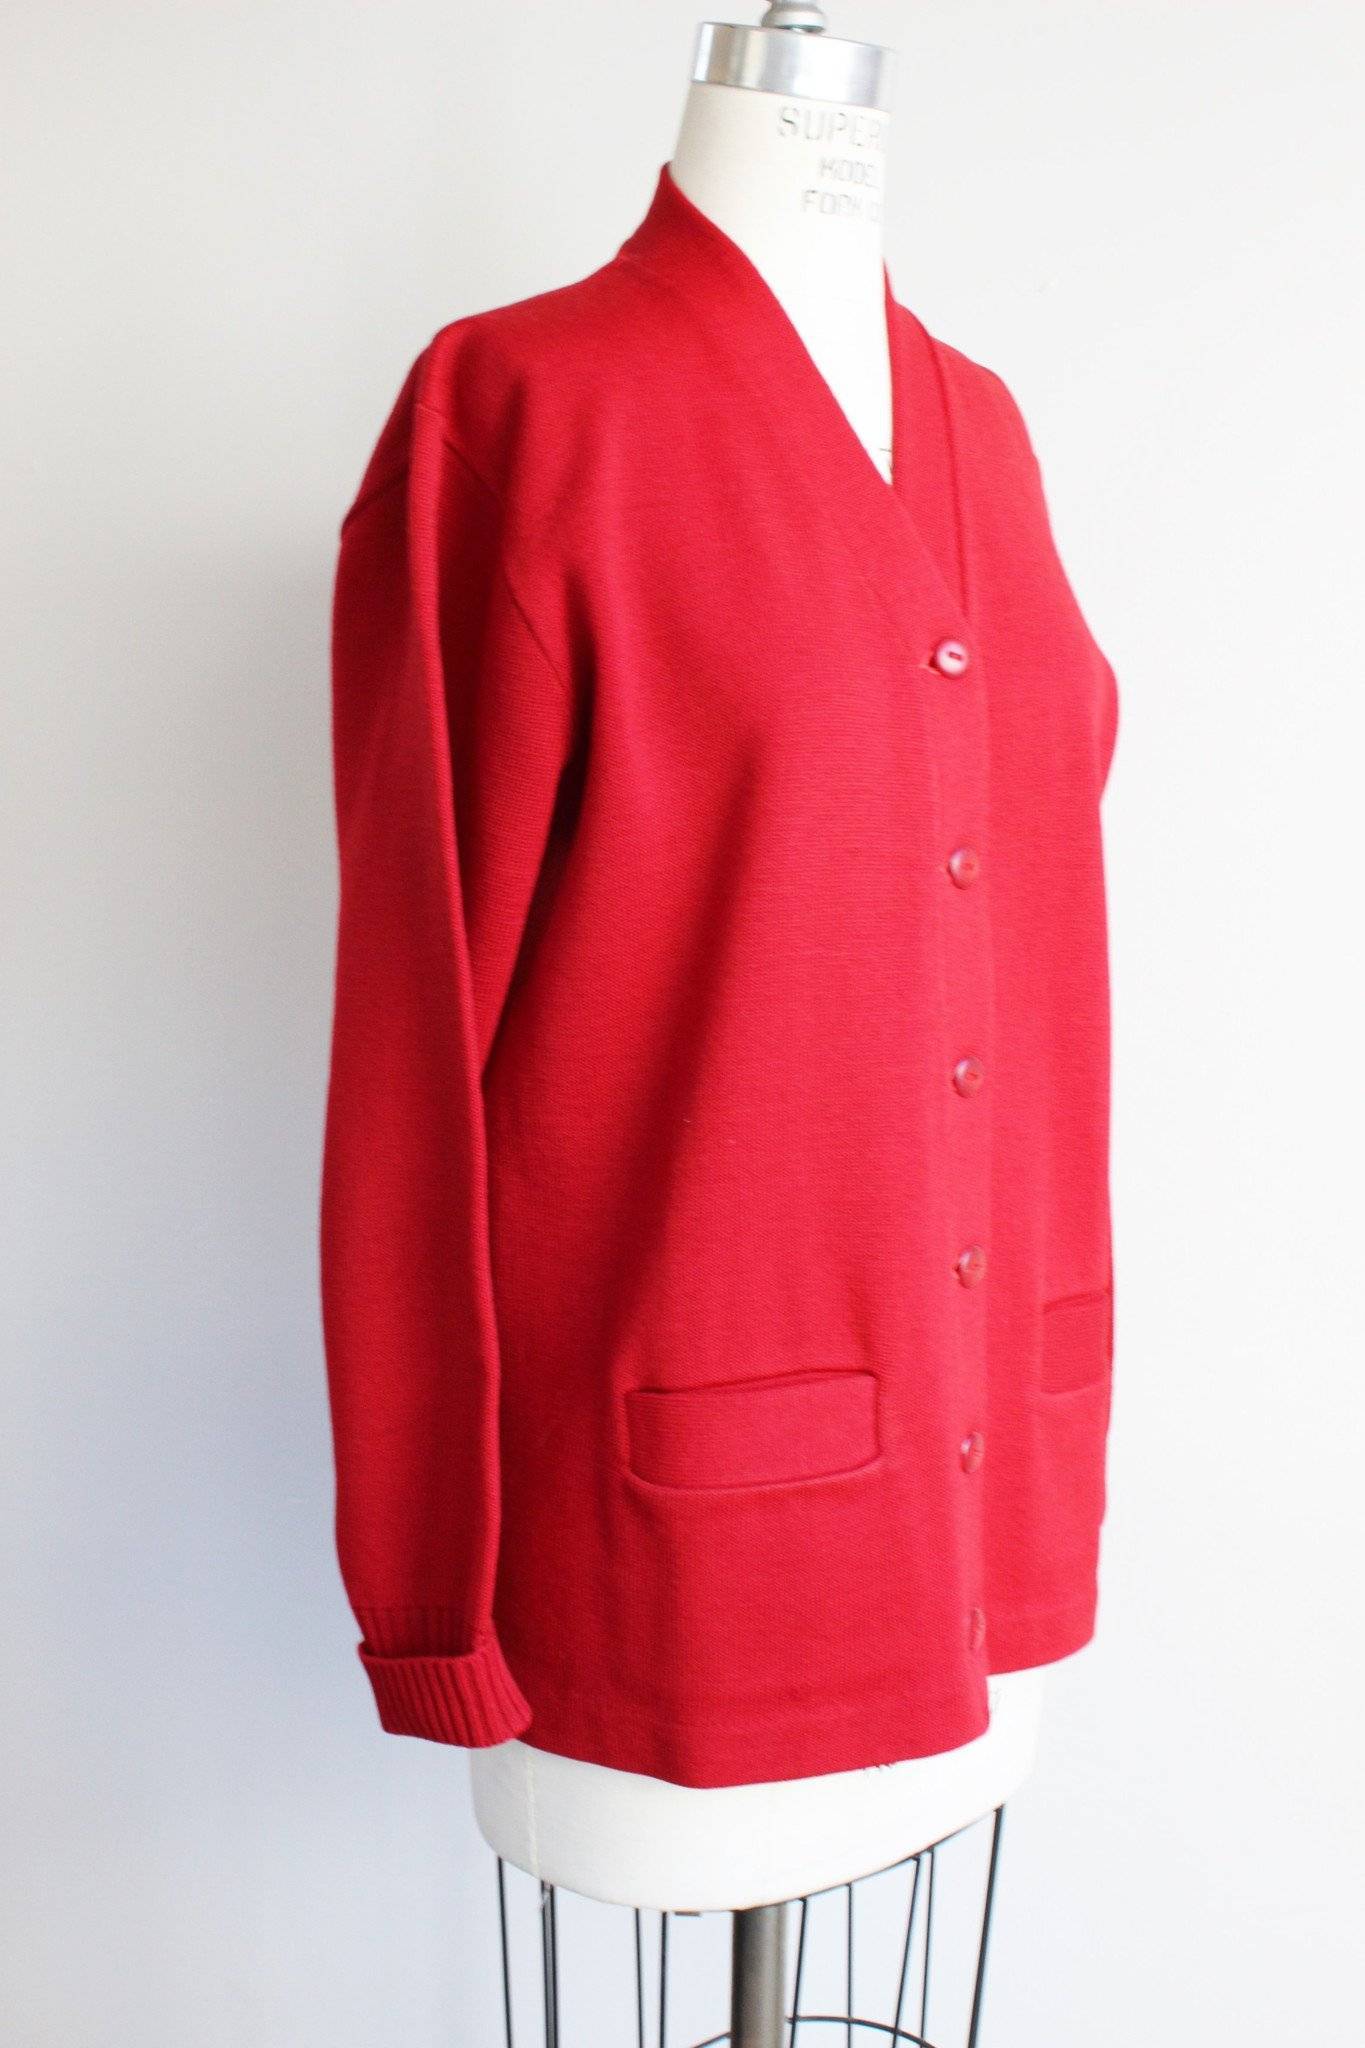 Vintage 1950s Red Criterion Class Sweater – Toadstool Farm Vintage